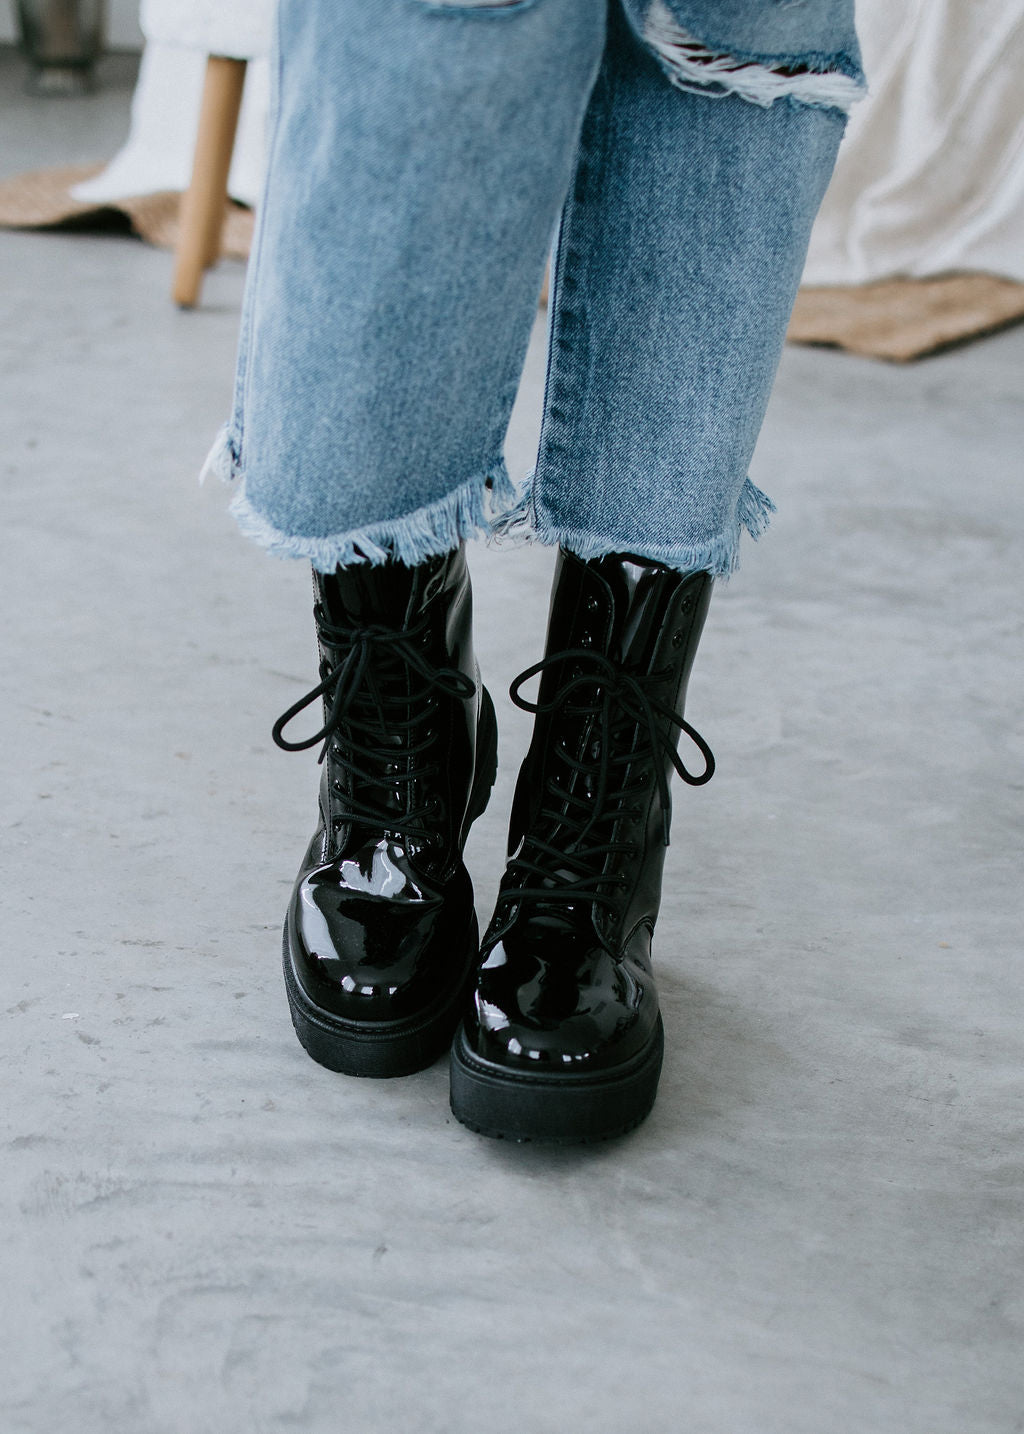 Lace up (combat) boot review - Lilly Style